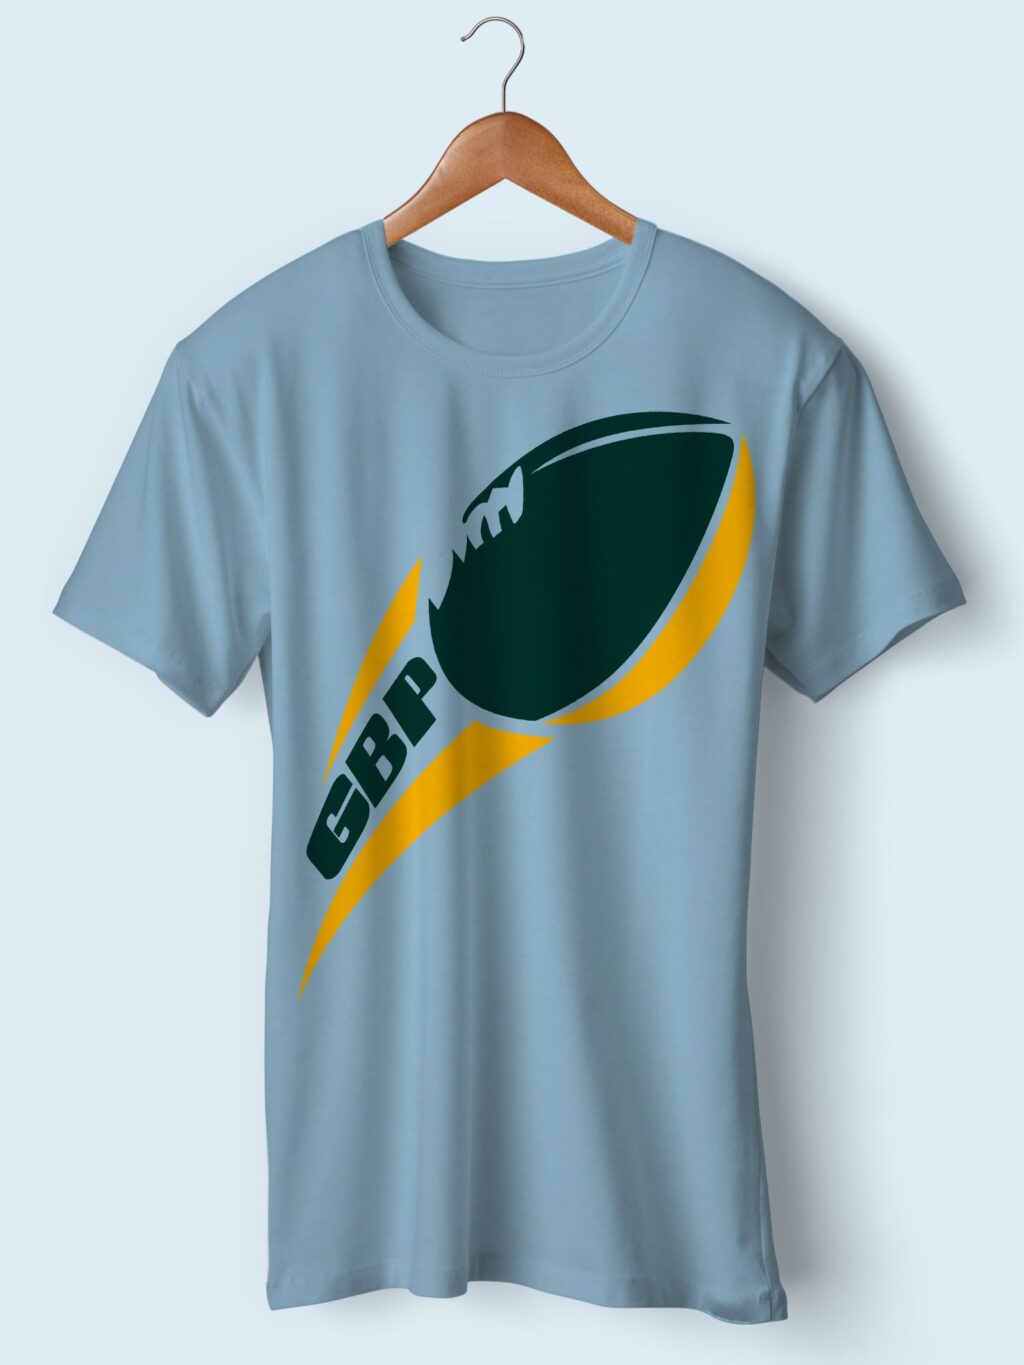 green bay packers 09 min NFL Green Bay Packers SVG, SVG Files For Silhouette, Green Bay Packers Files For Cricut, Green Bay Packers SVG, DXF, EPS, PNG Instant Download.Green Bay Packers SVG, SVG Files For Silhouette, Green Bay Packers Files For Cricut, Green Bay Packers SVG, DXF, EPS, PNG Instant Download.